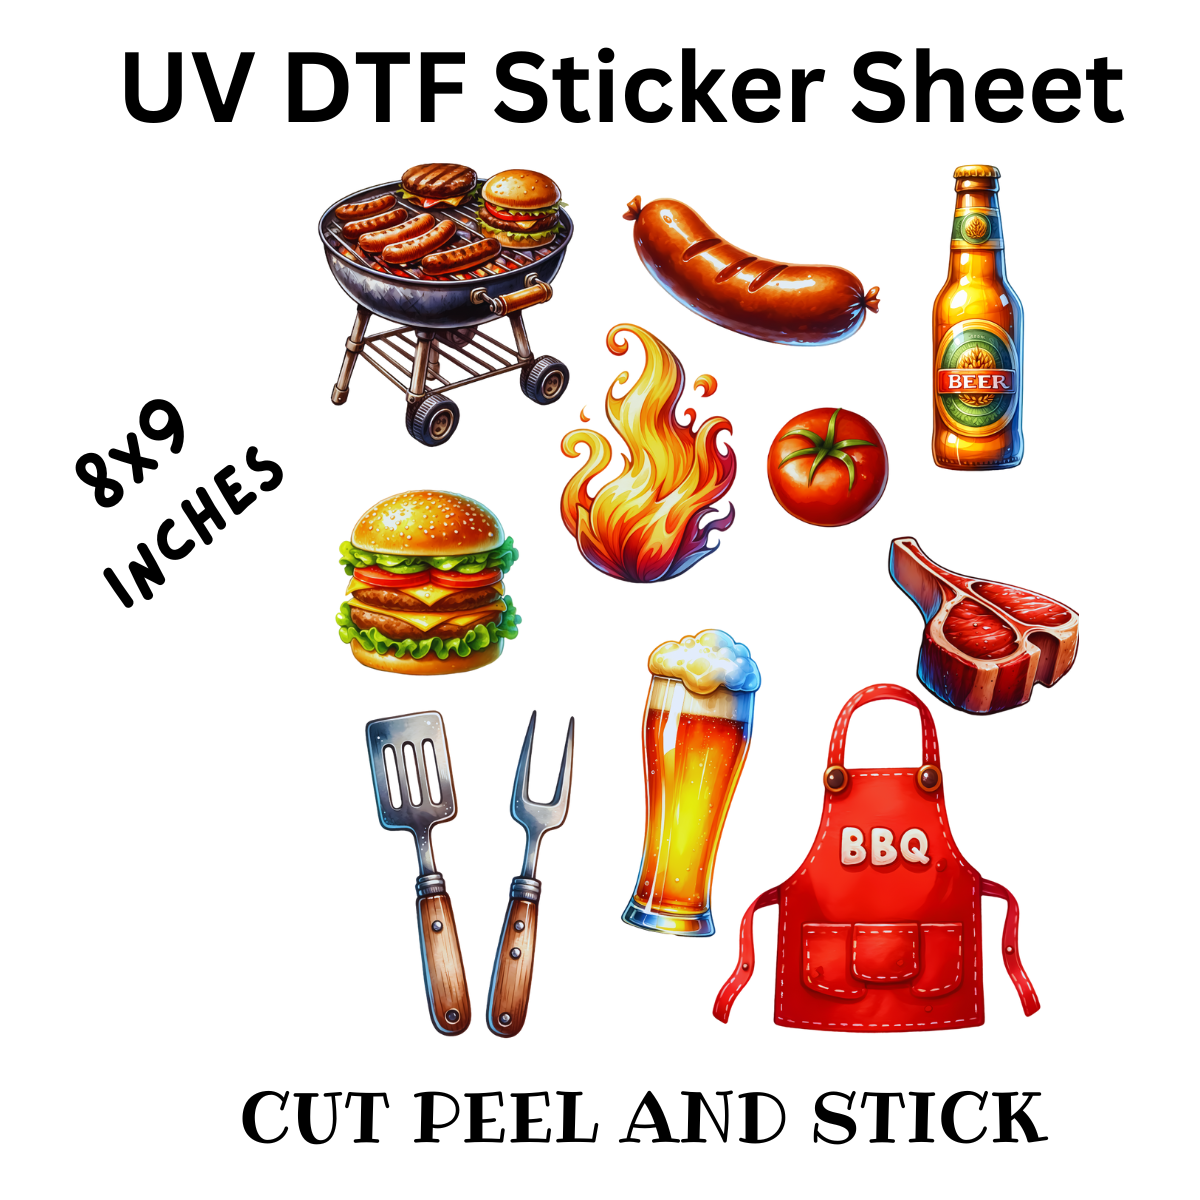 BBQ UV DTF Decal Sticker Sheet 8x9 inches